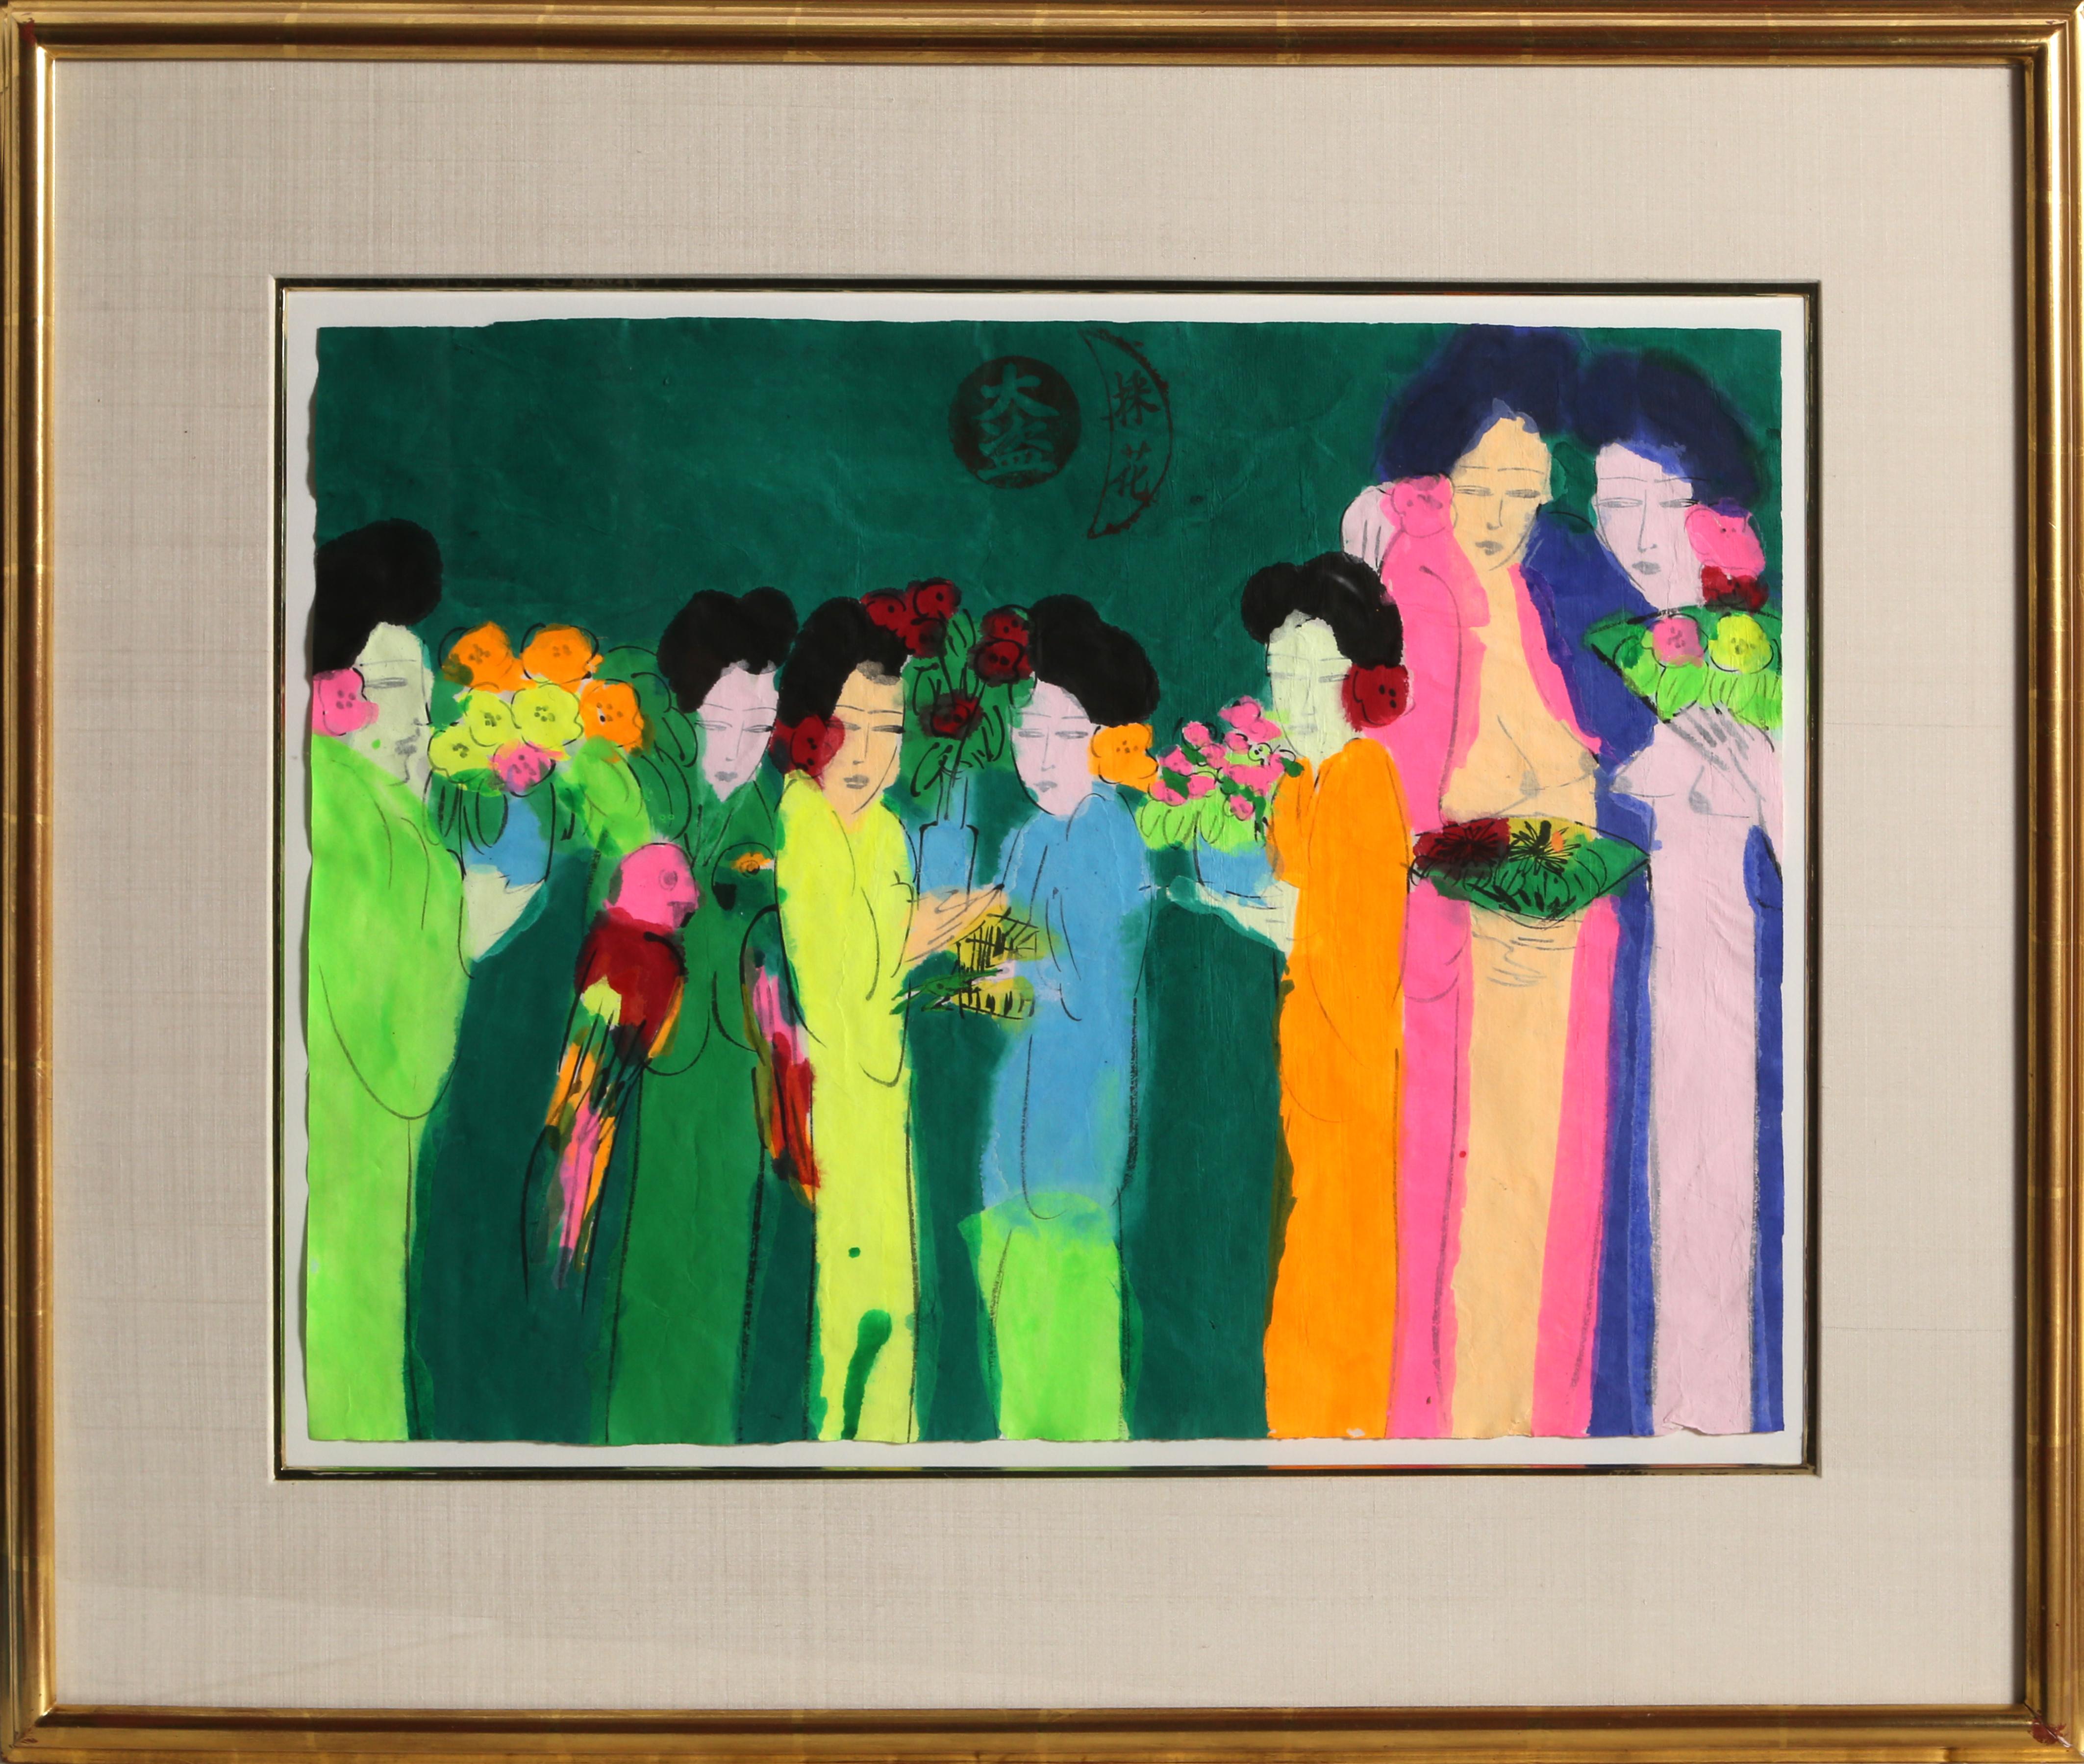 Artist: Walasse Ting, Chinese/American (1929 - 2010)
Title: Seven Geishas with Flowers
Year:	circa 1980
Medium:	Chinese Ink and Acrylic on Rice Paper, Stamped upper middle
Paper Size: 14 x 18.5 in. (35.56 x 46.99 cm)
Frame Size: 22.25 x 26.5 inches